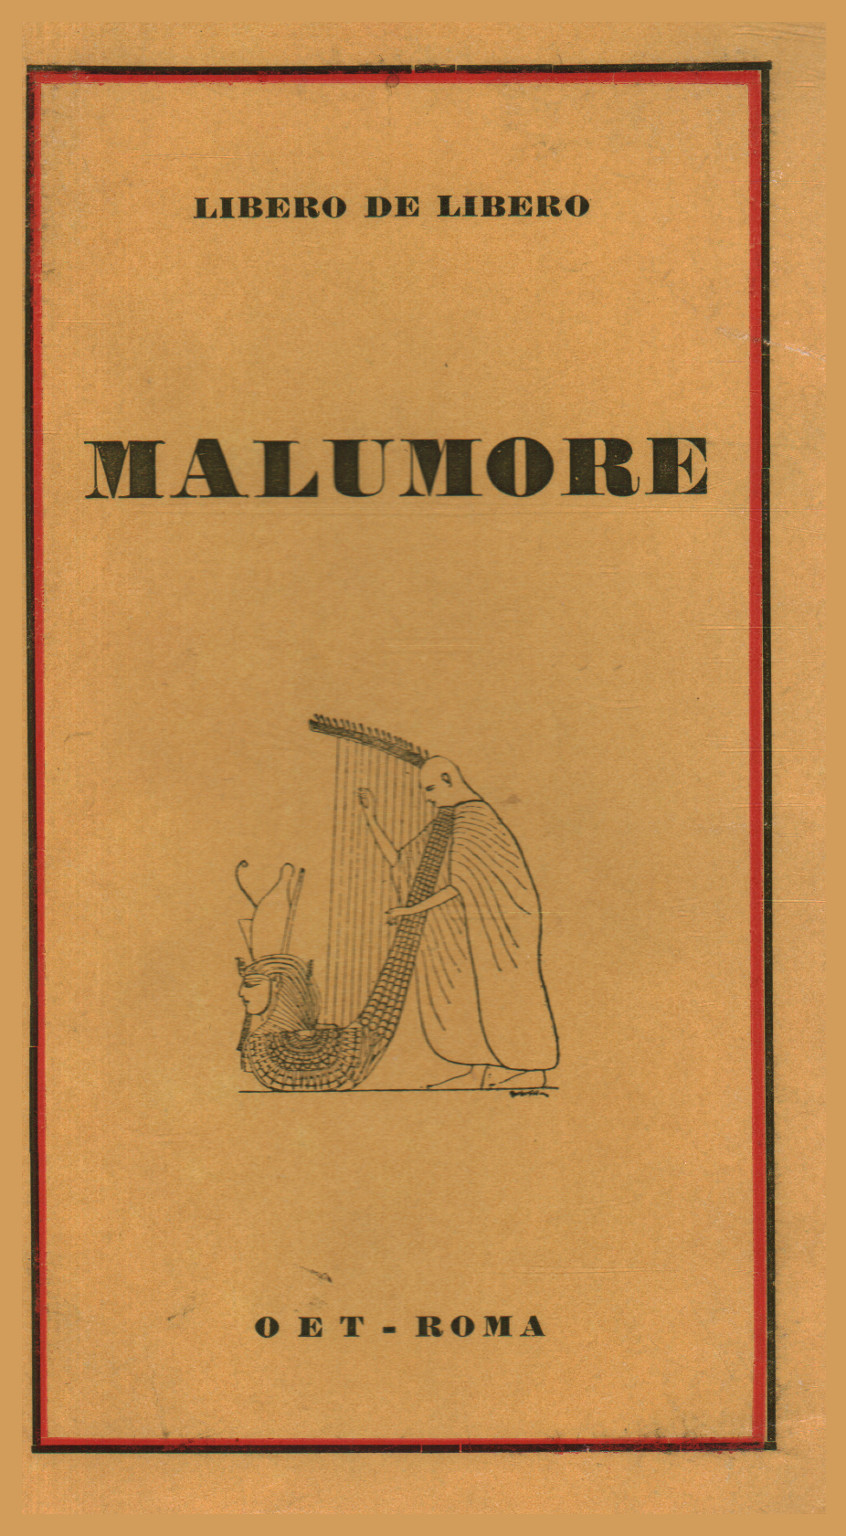 Malumore, s.a.